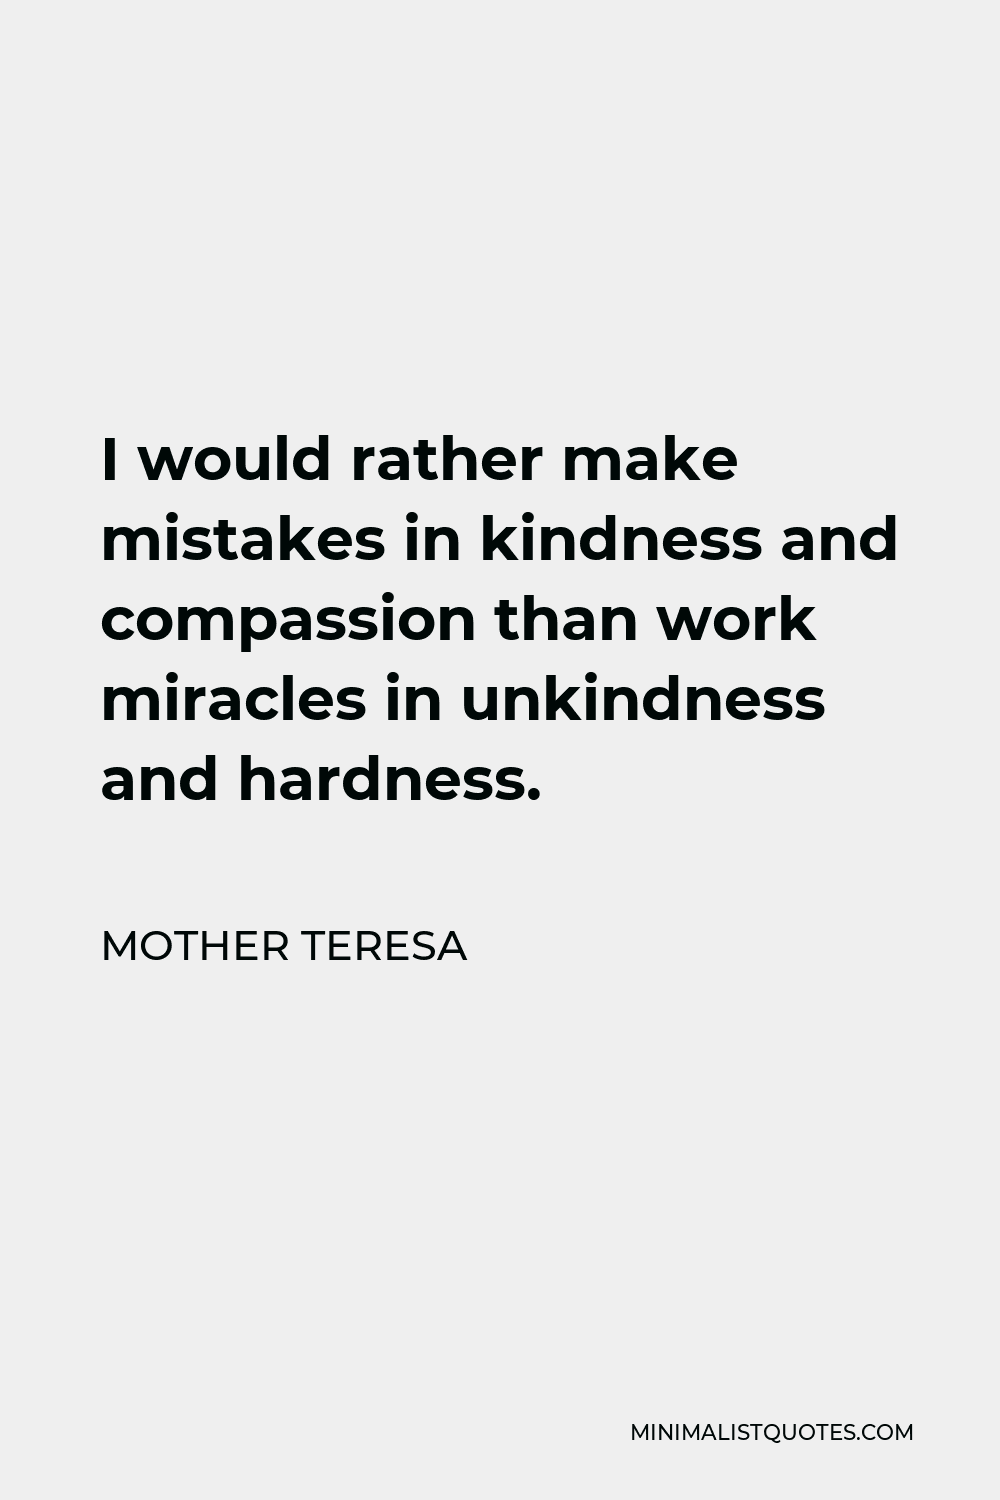 Mother Teresa Quote - I would rather make mistakes in kindness and compassion than work miracles in unkindness and hardness.